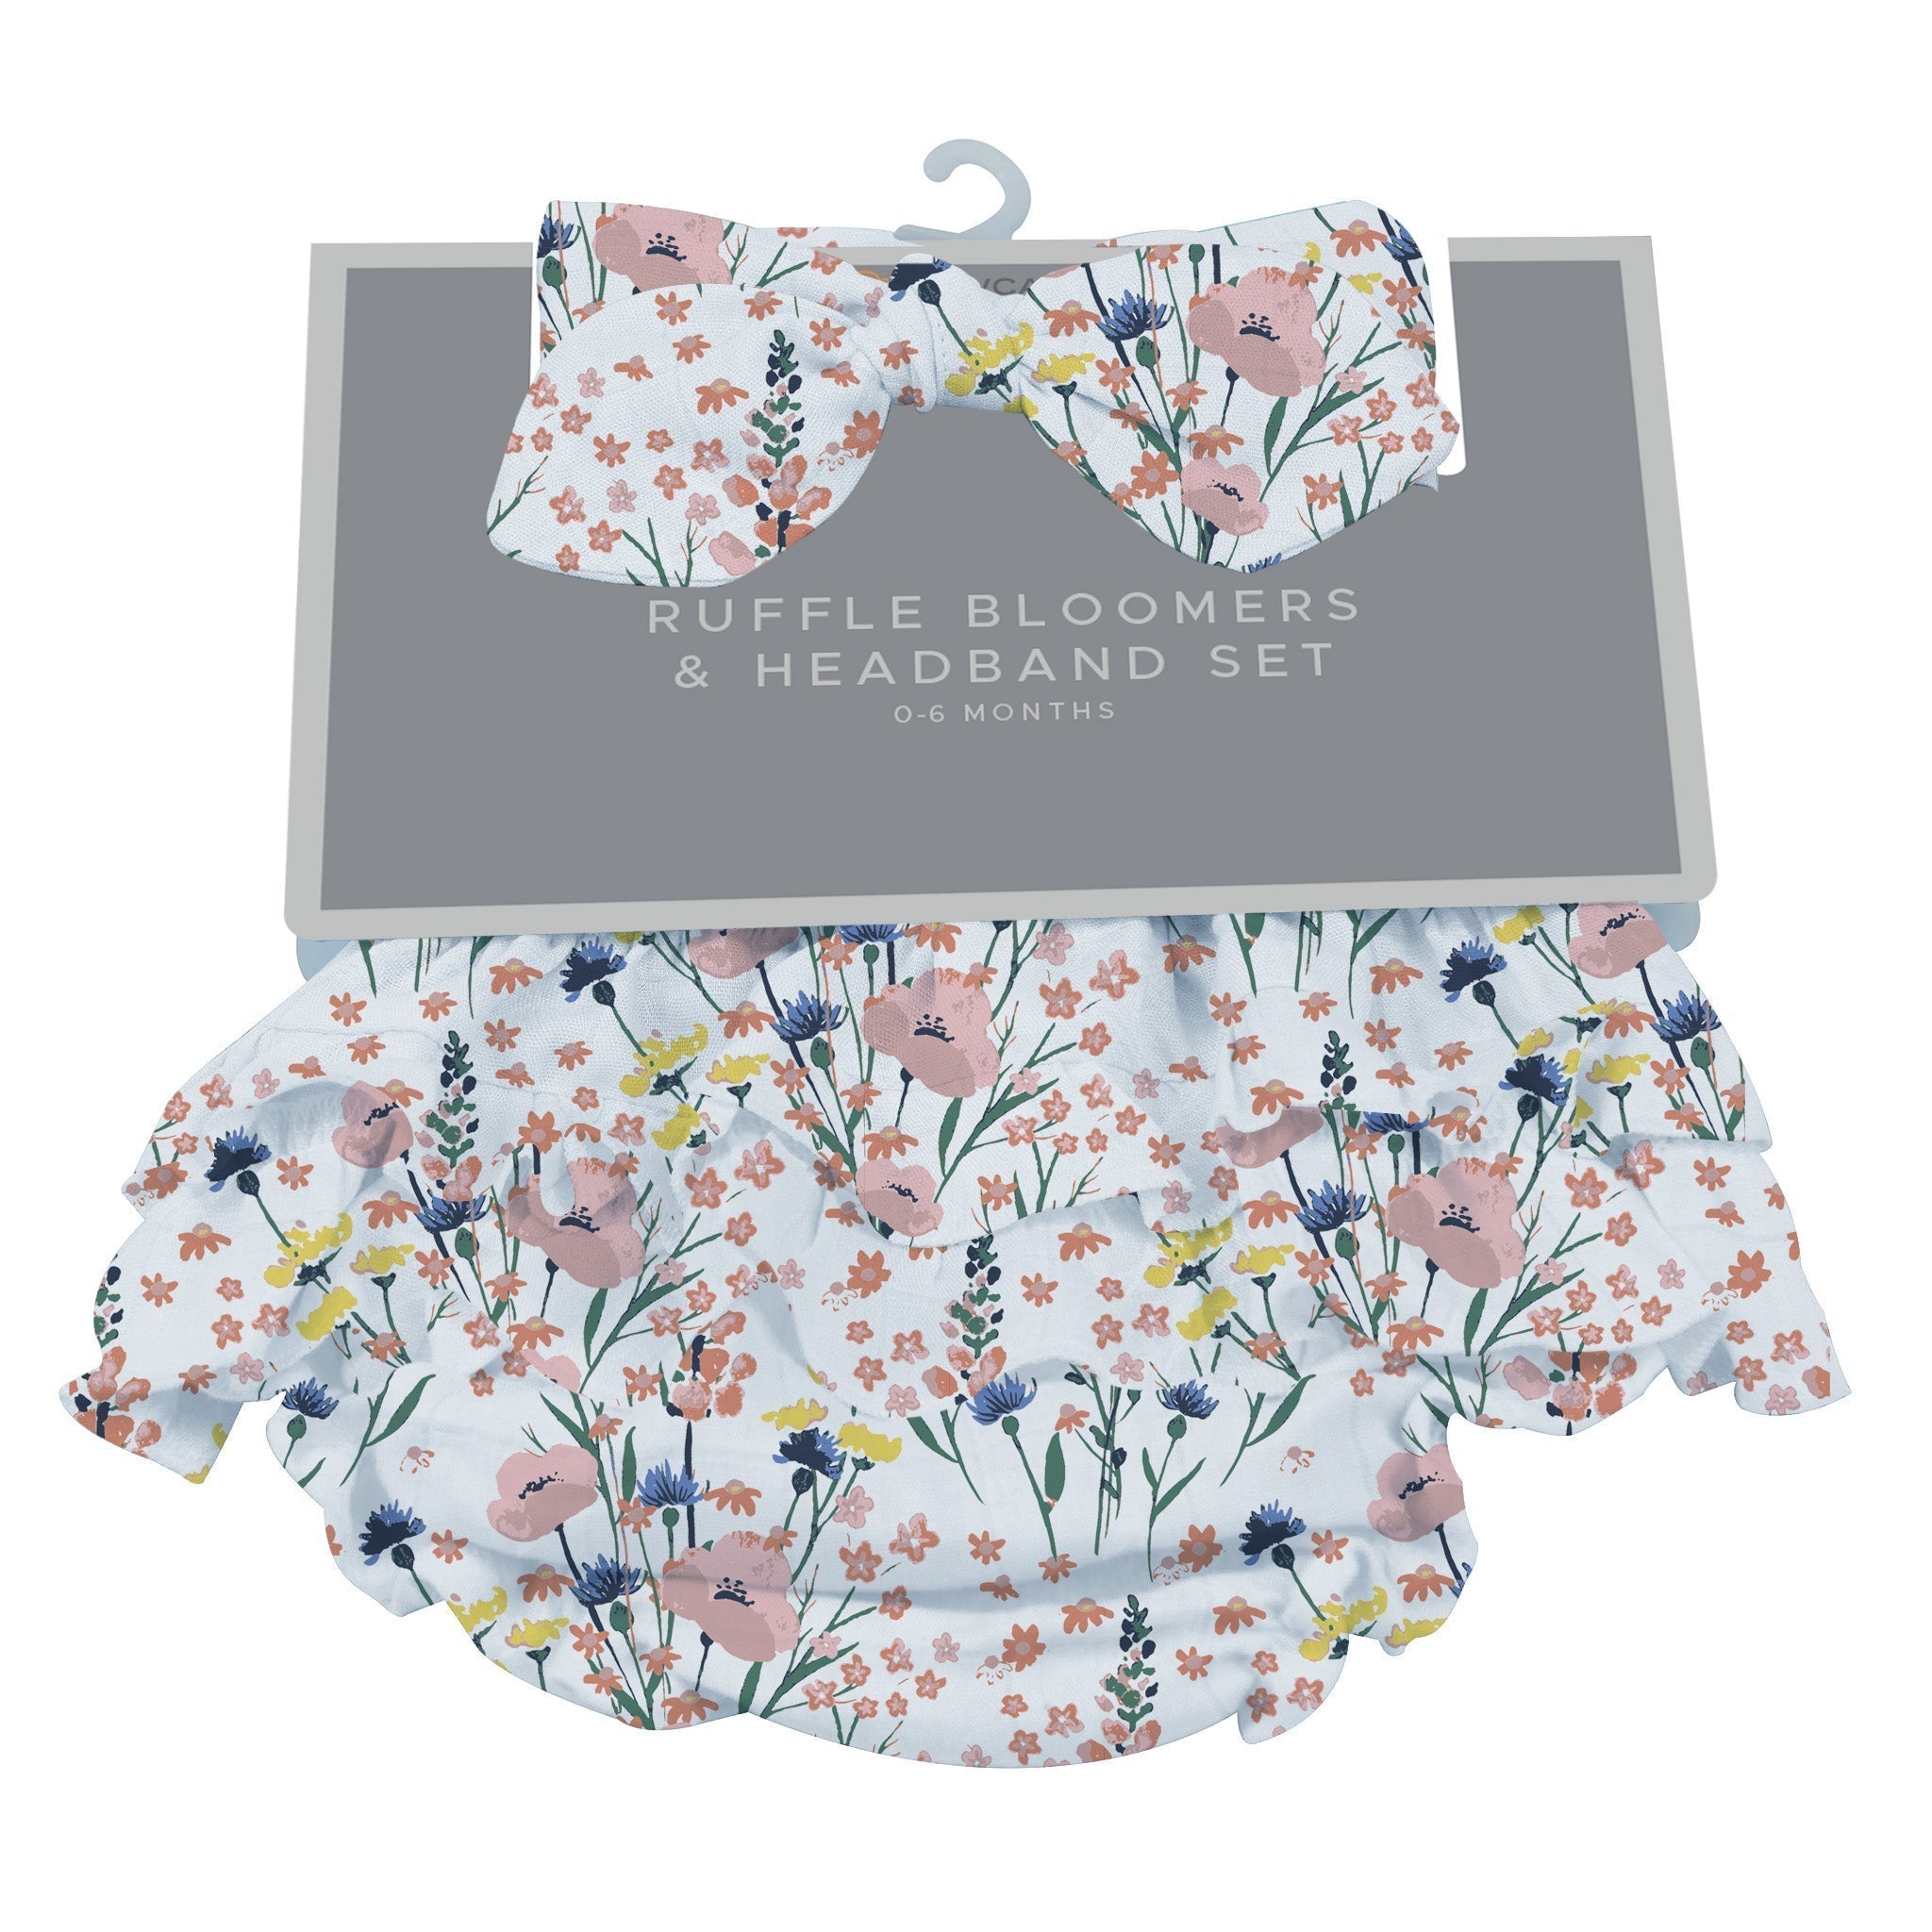 Baby bloomers with a headband set wildflowers